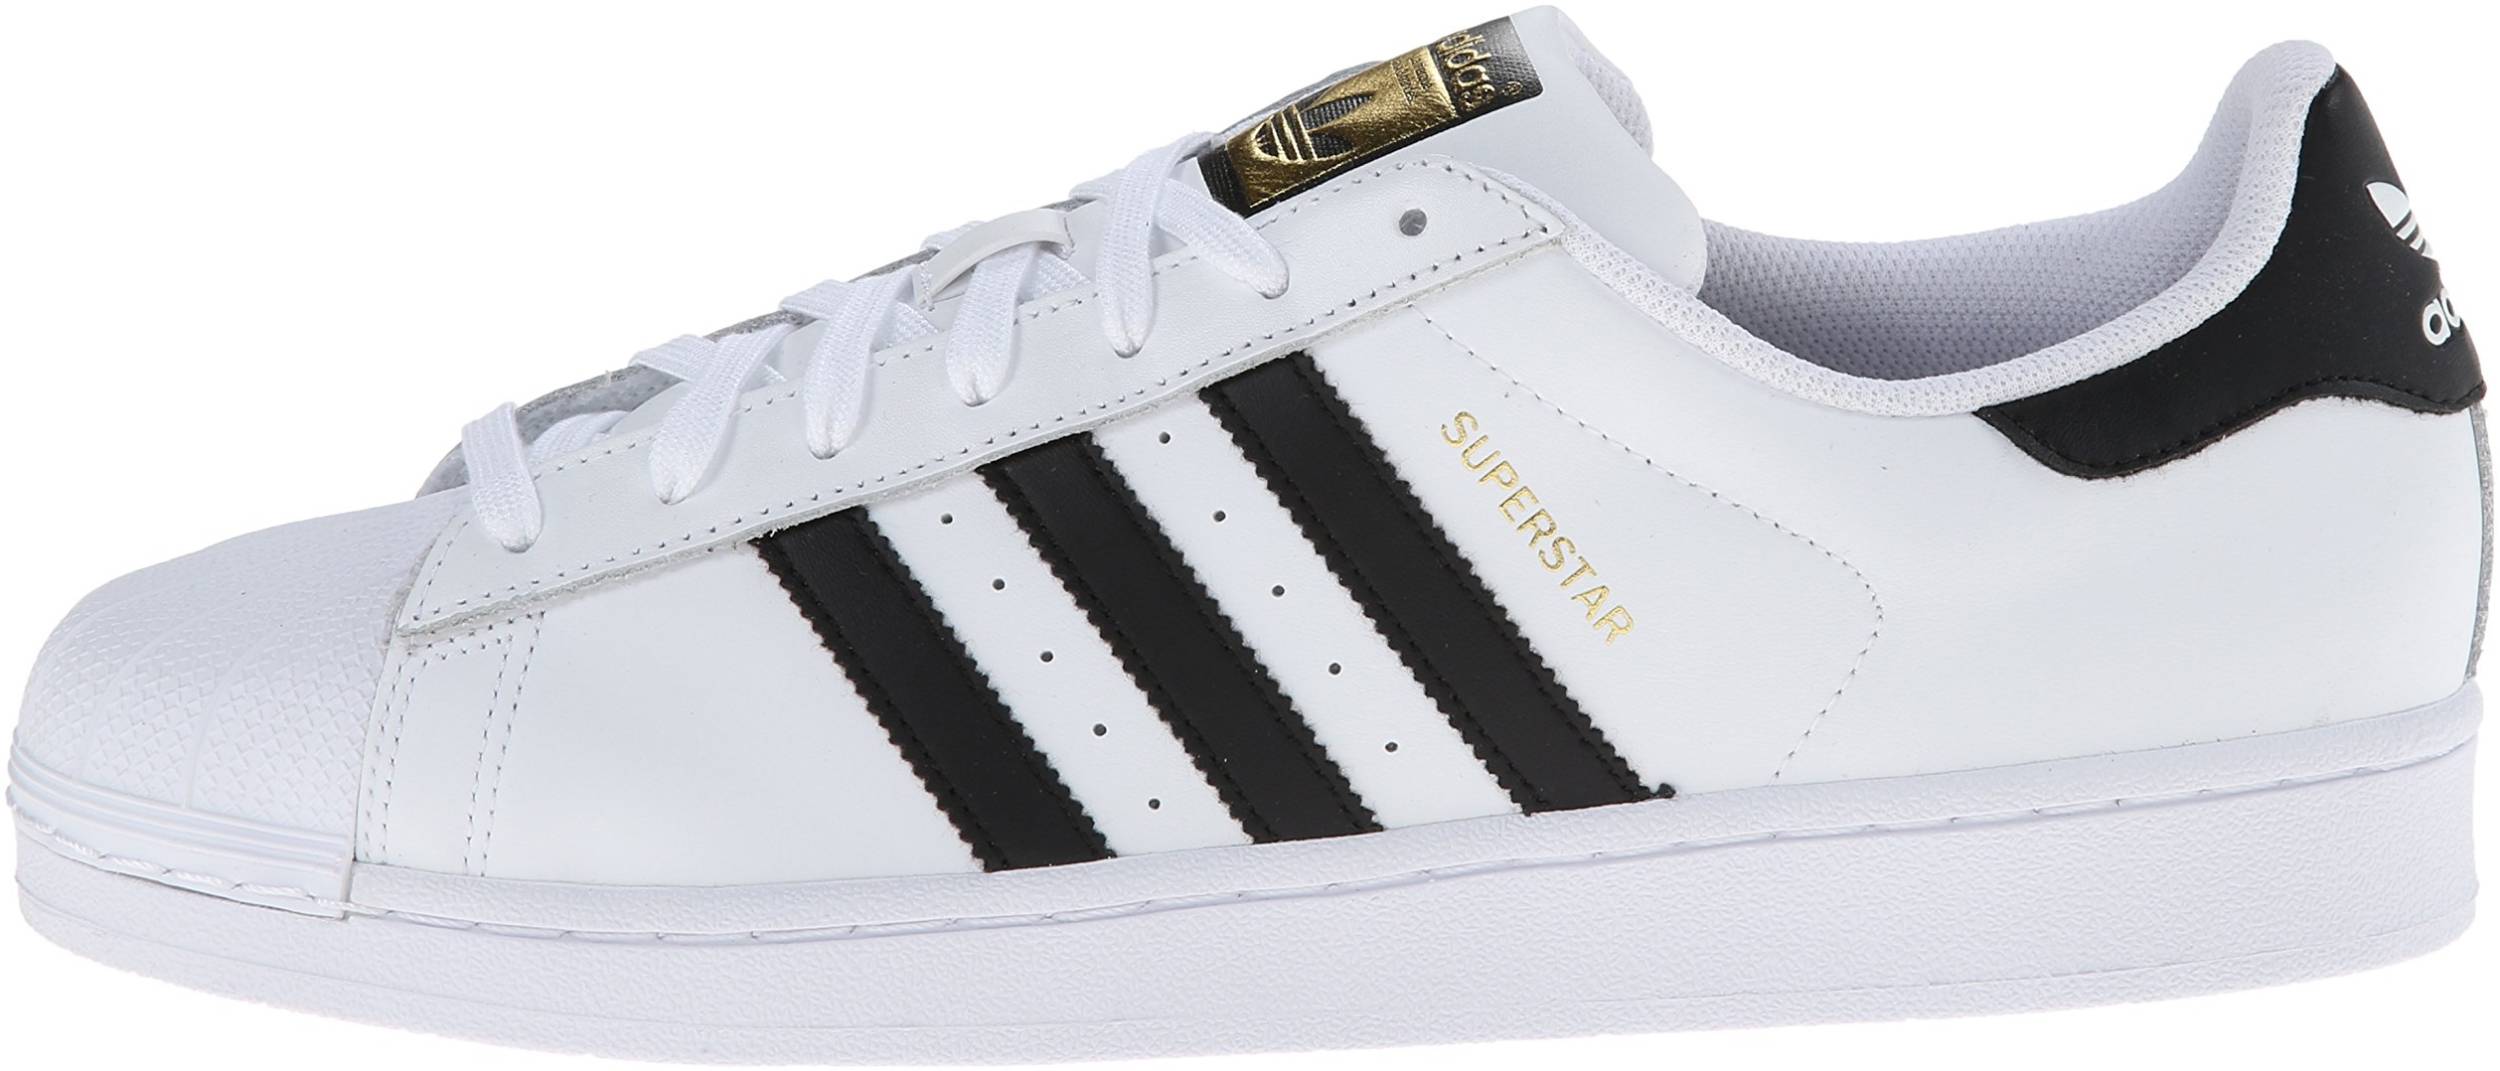 Make way Contradict clothing 70+ colors of Adidas Superstar (from $30) | RunRepeat